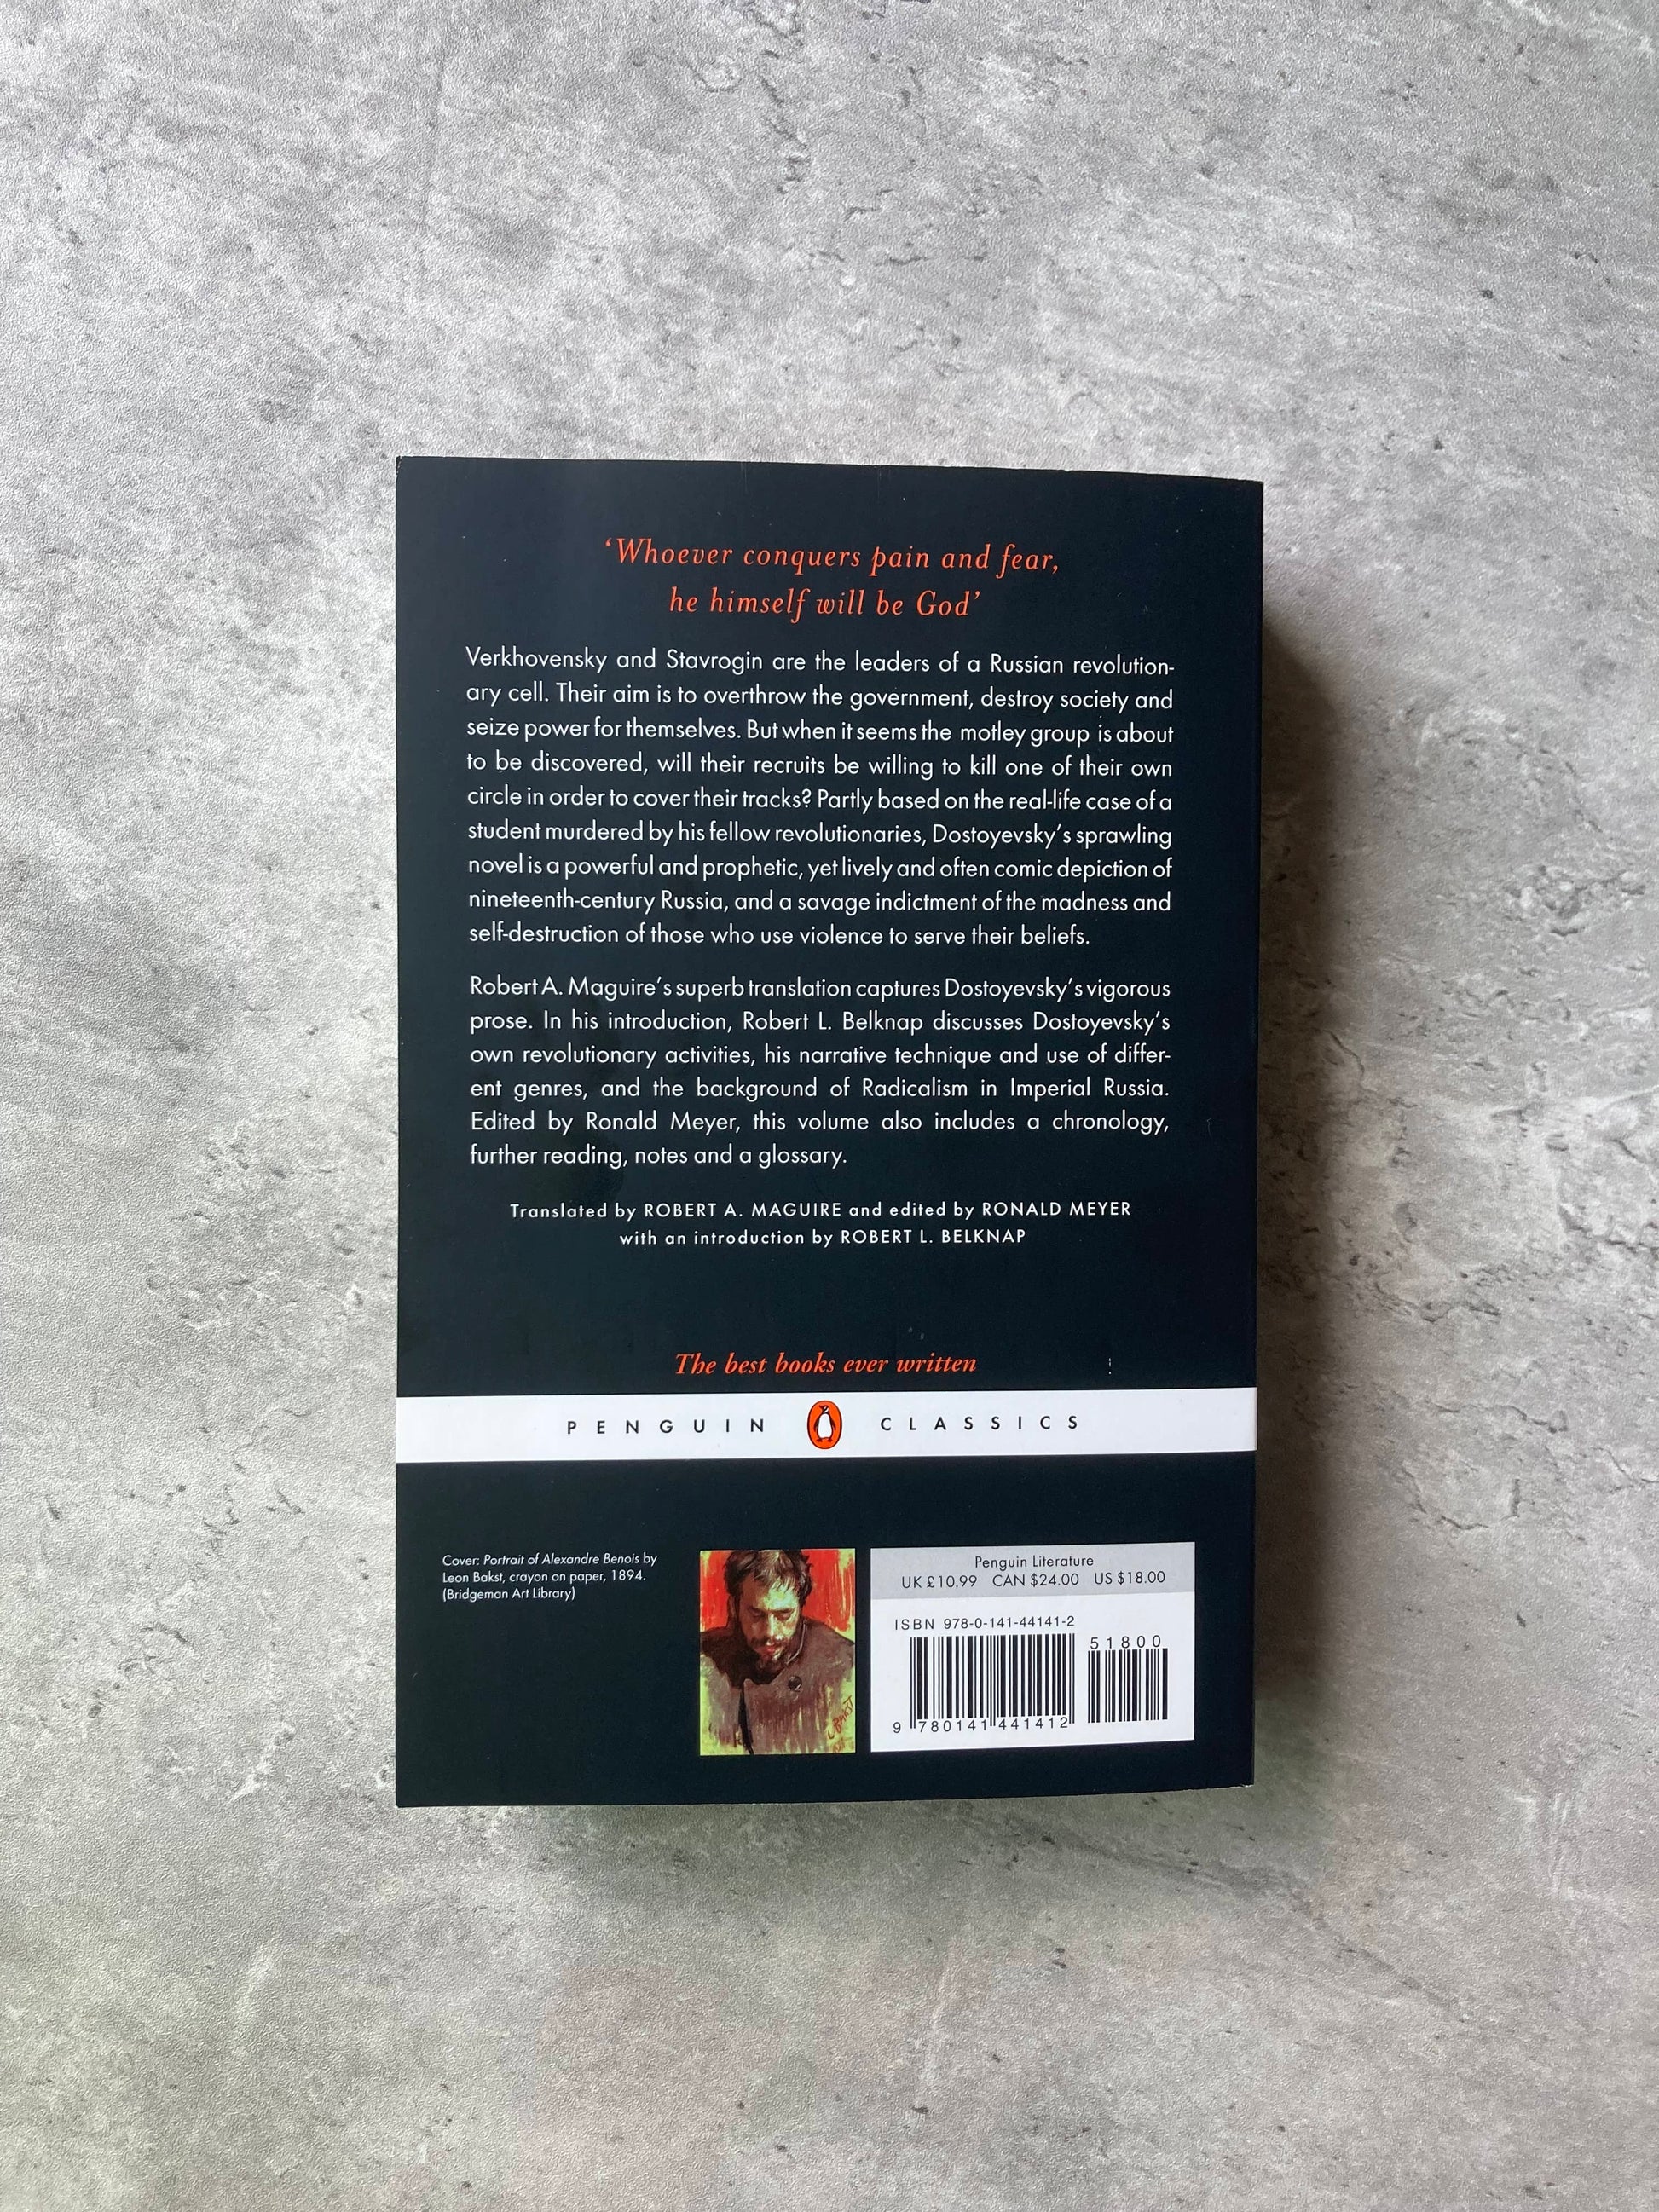 penguin book back covers